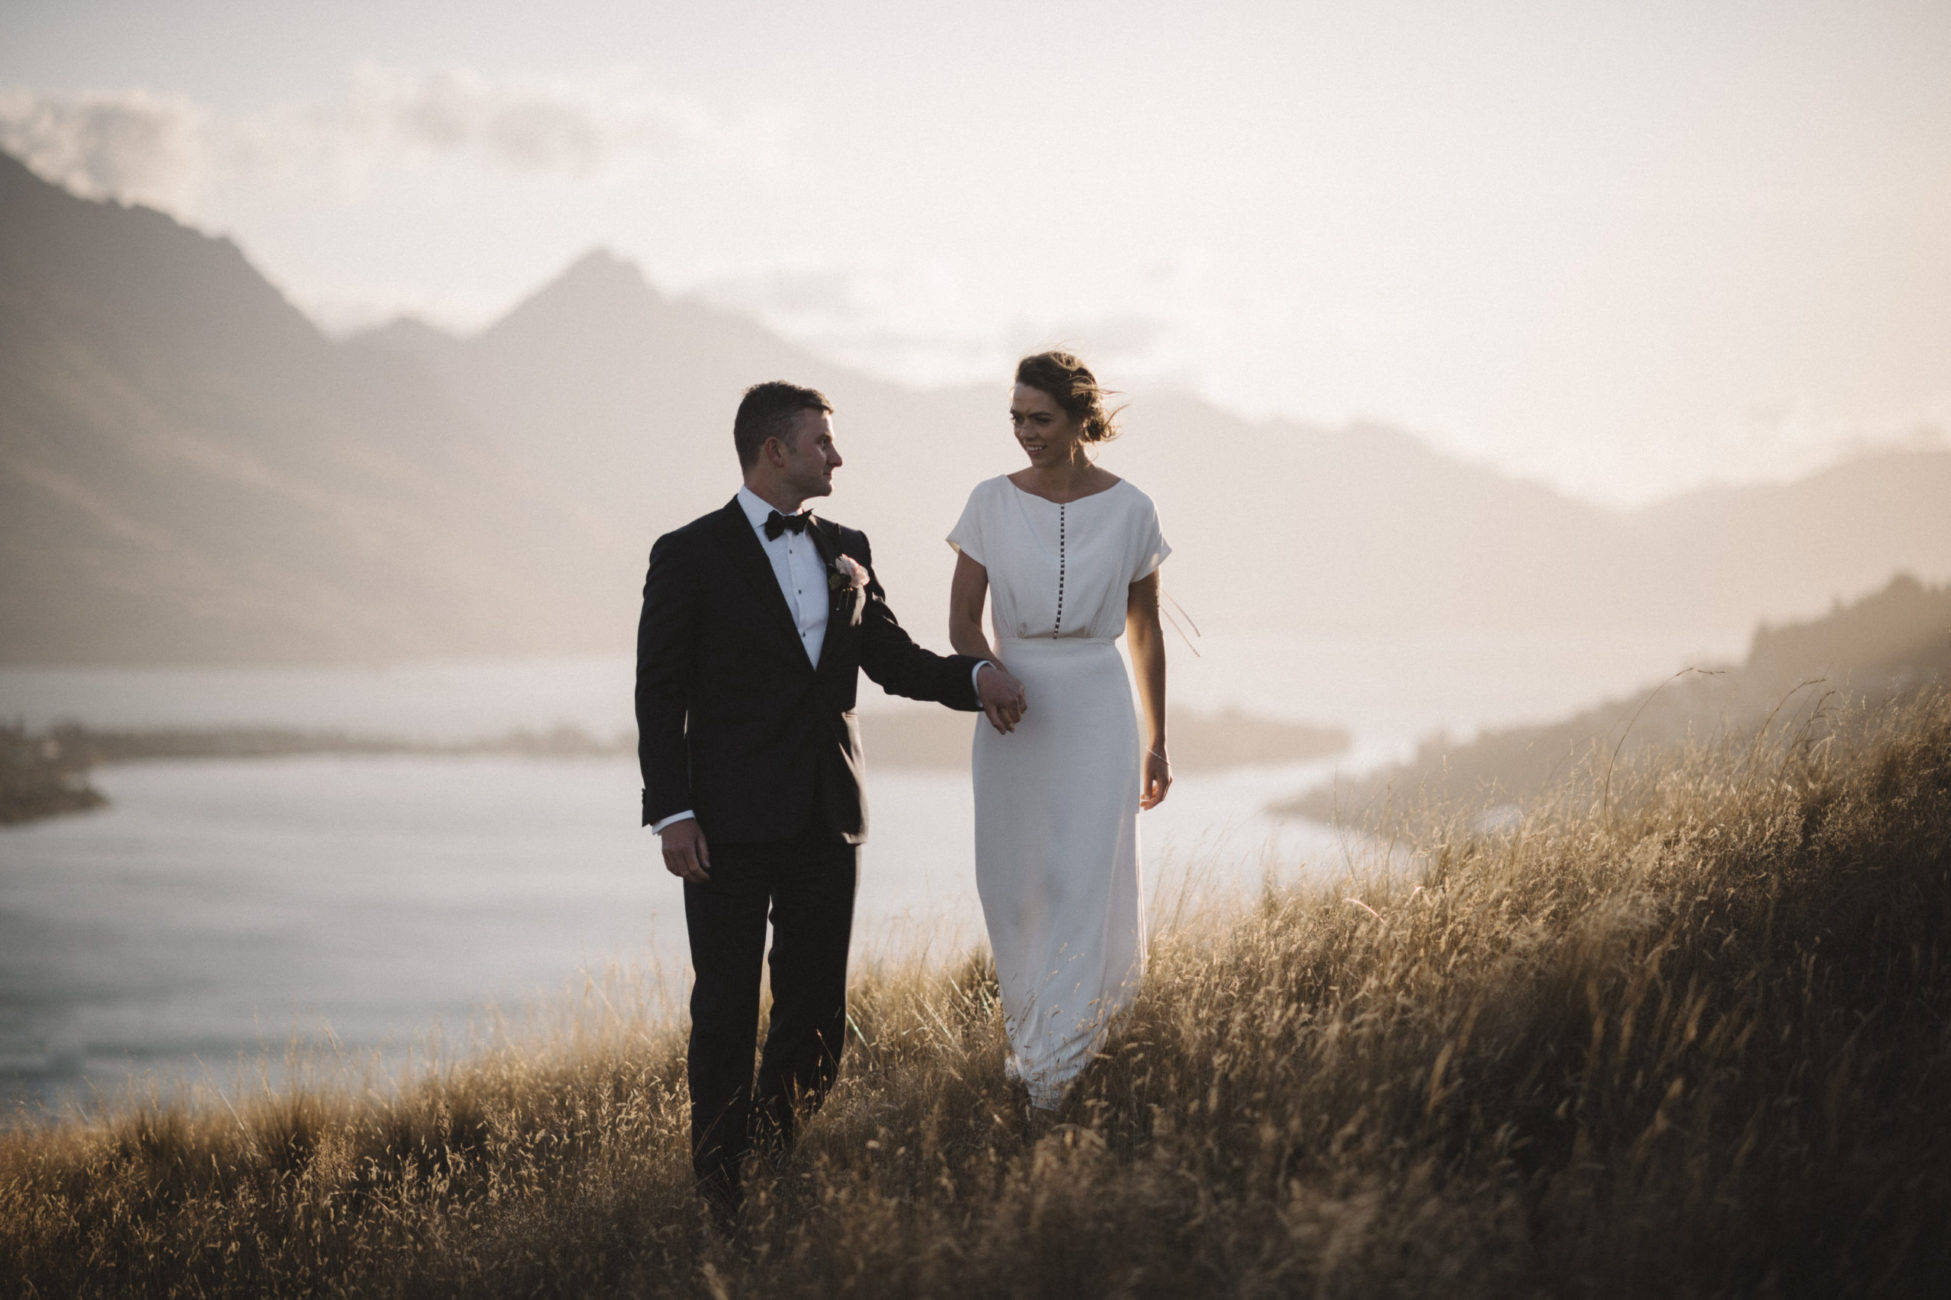 Emily & Wyatt at High Country NZ wedding venue, Queentown walking together at sunset